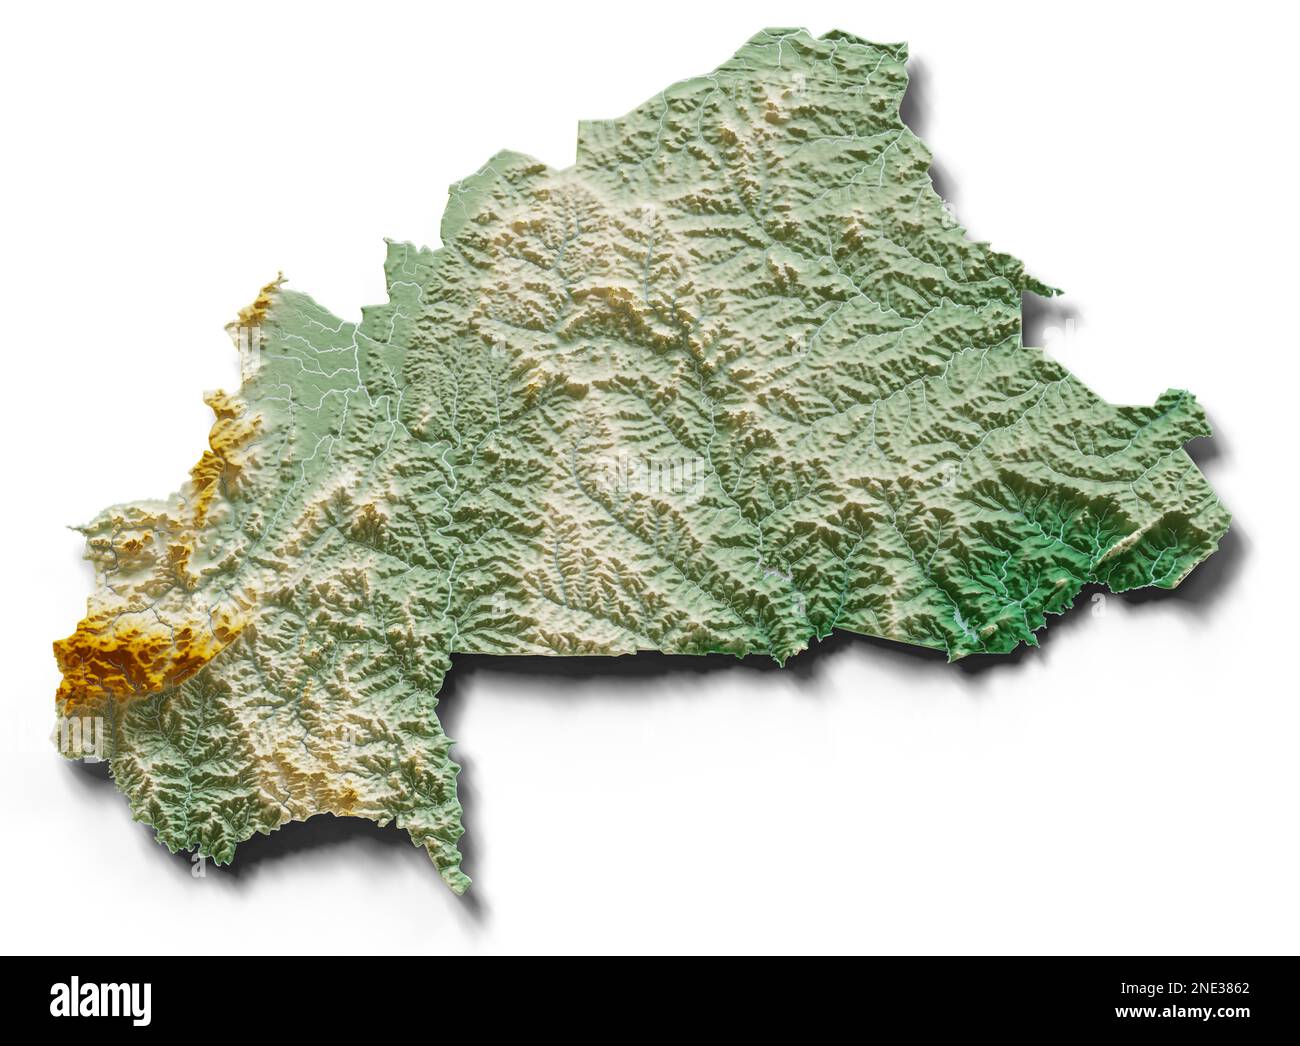 Burkina Faso Highly Detailed 3d Rendering Of Shaded Relief Map With Rivers And Lakes Colored 4854